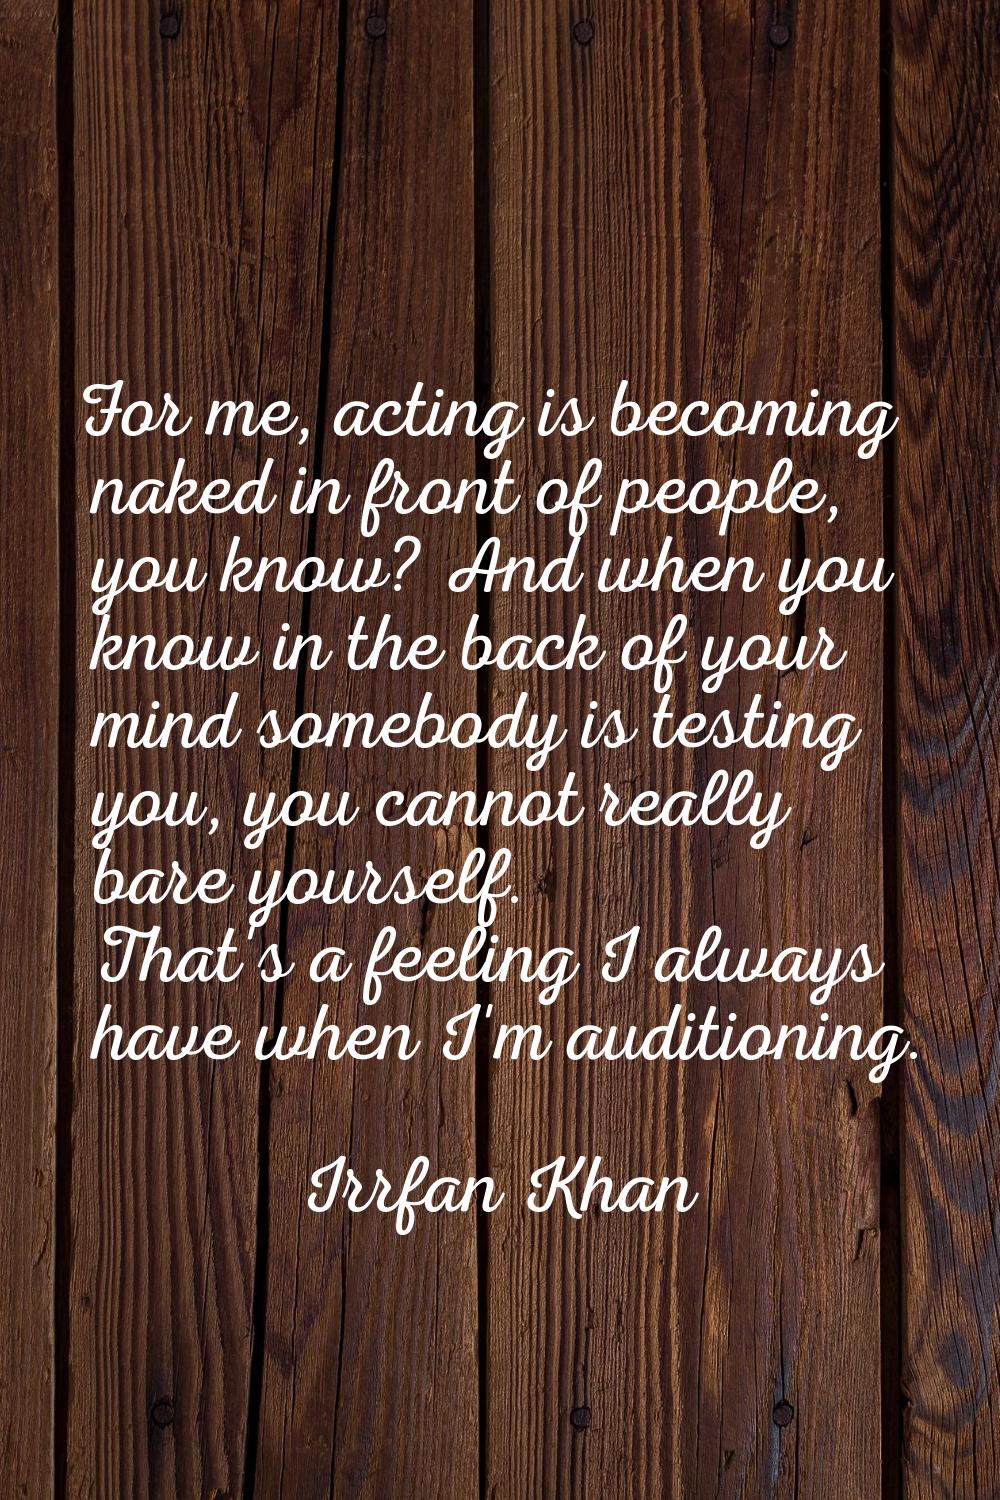 For me, acting is becoming naked in front of people, you know? And when you know in the back of you